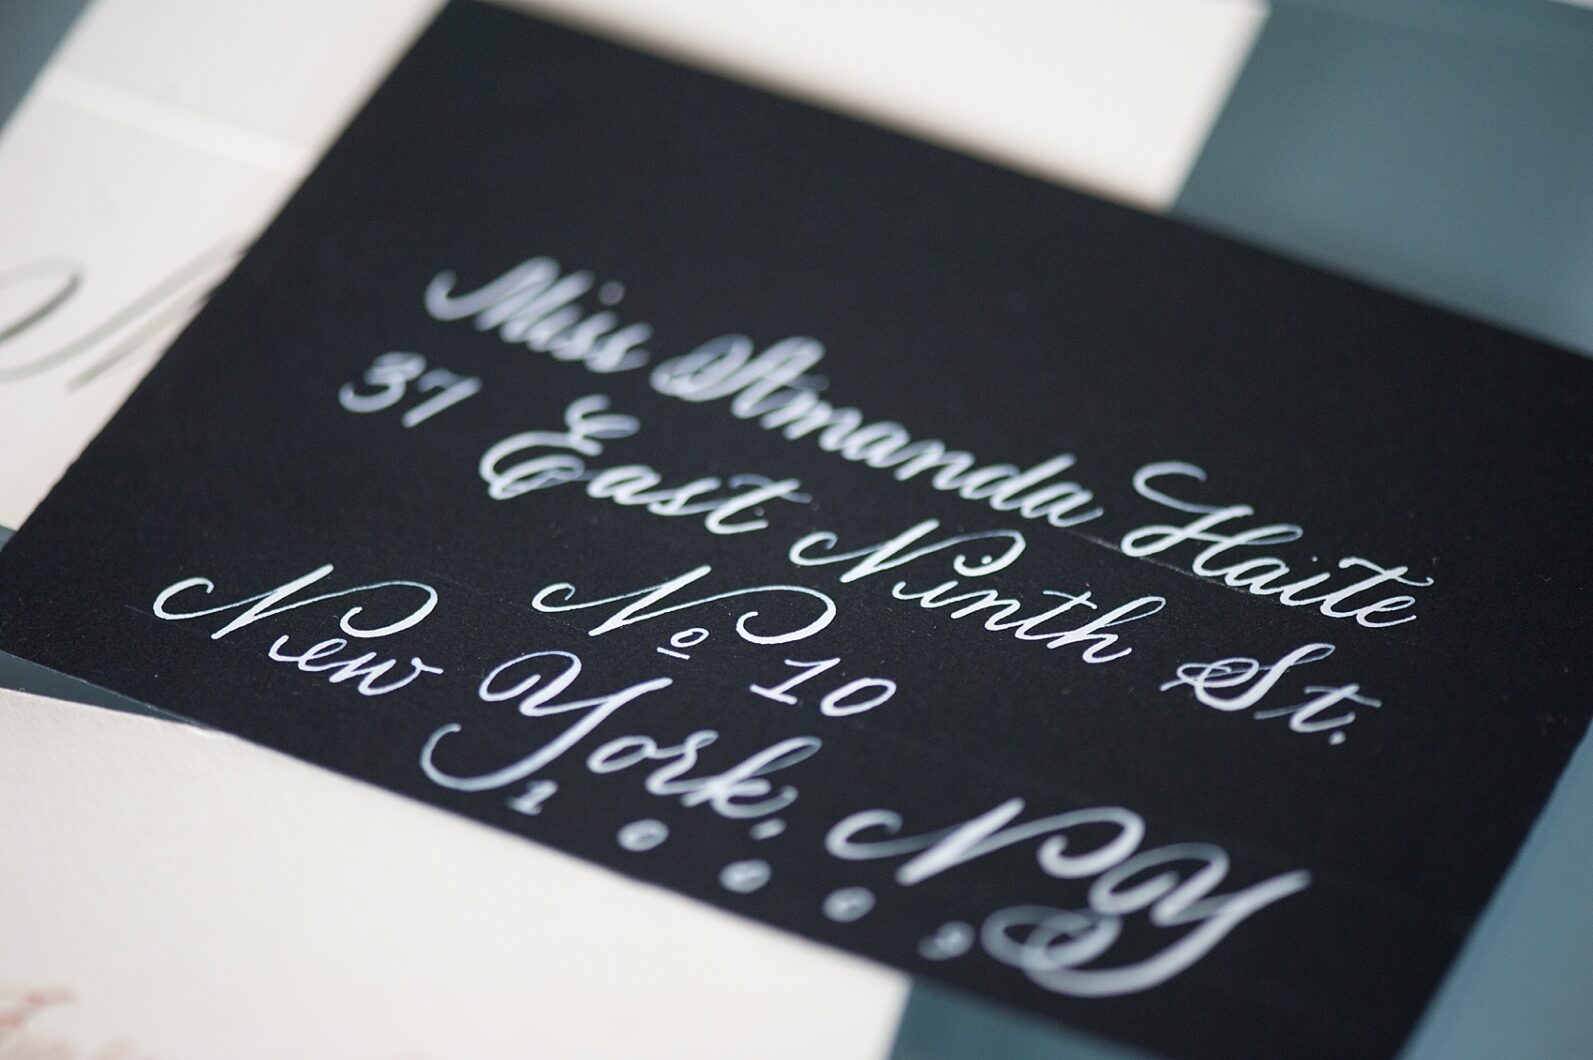 Hand calligraphy photos + advice from popular calligrapher. Images by Mikkel Paige Photography.